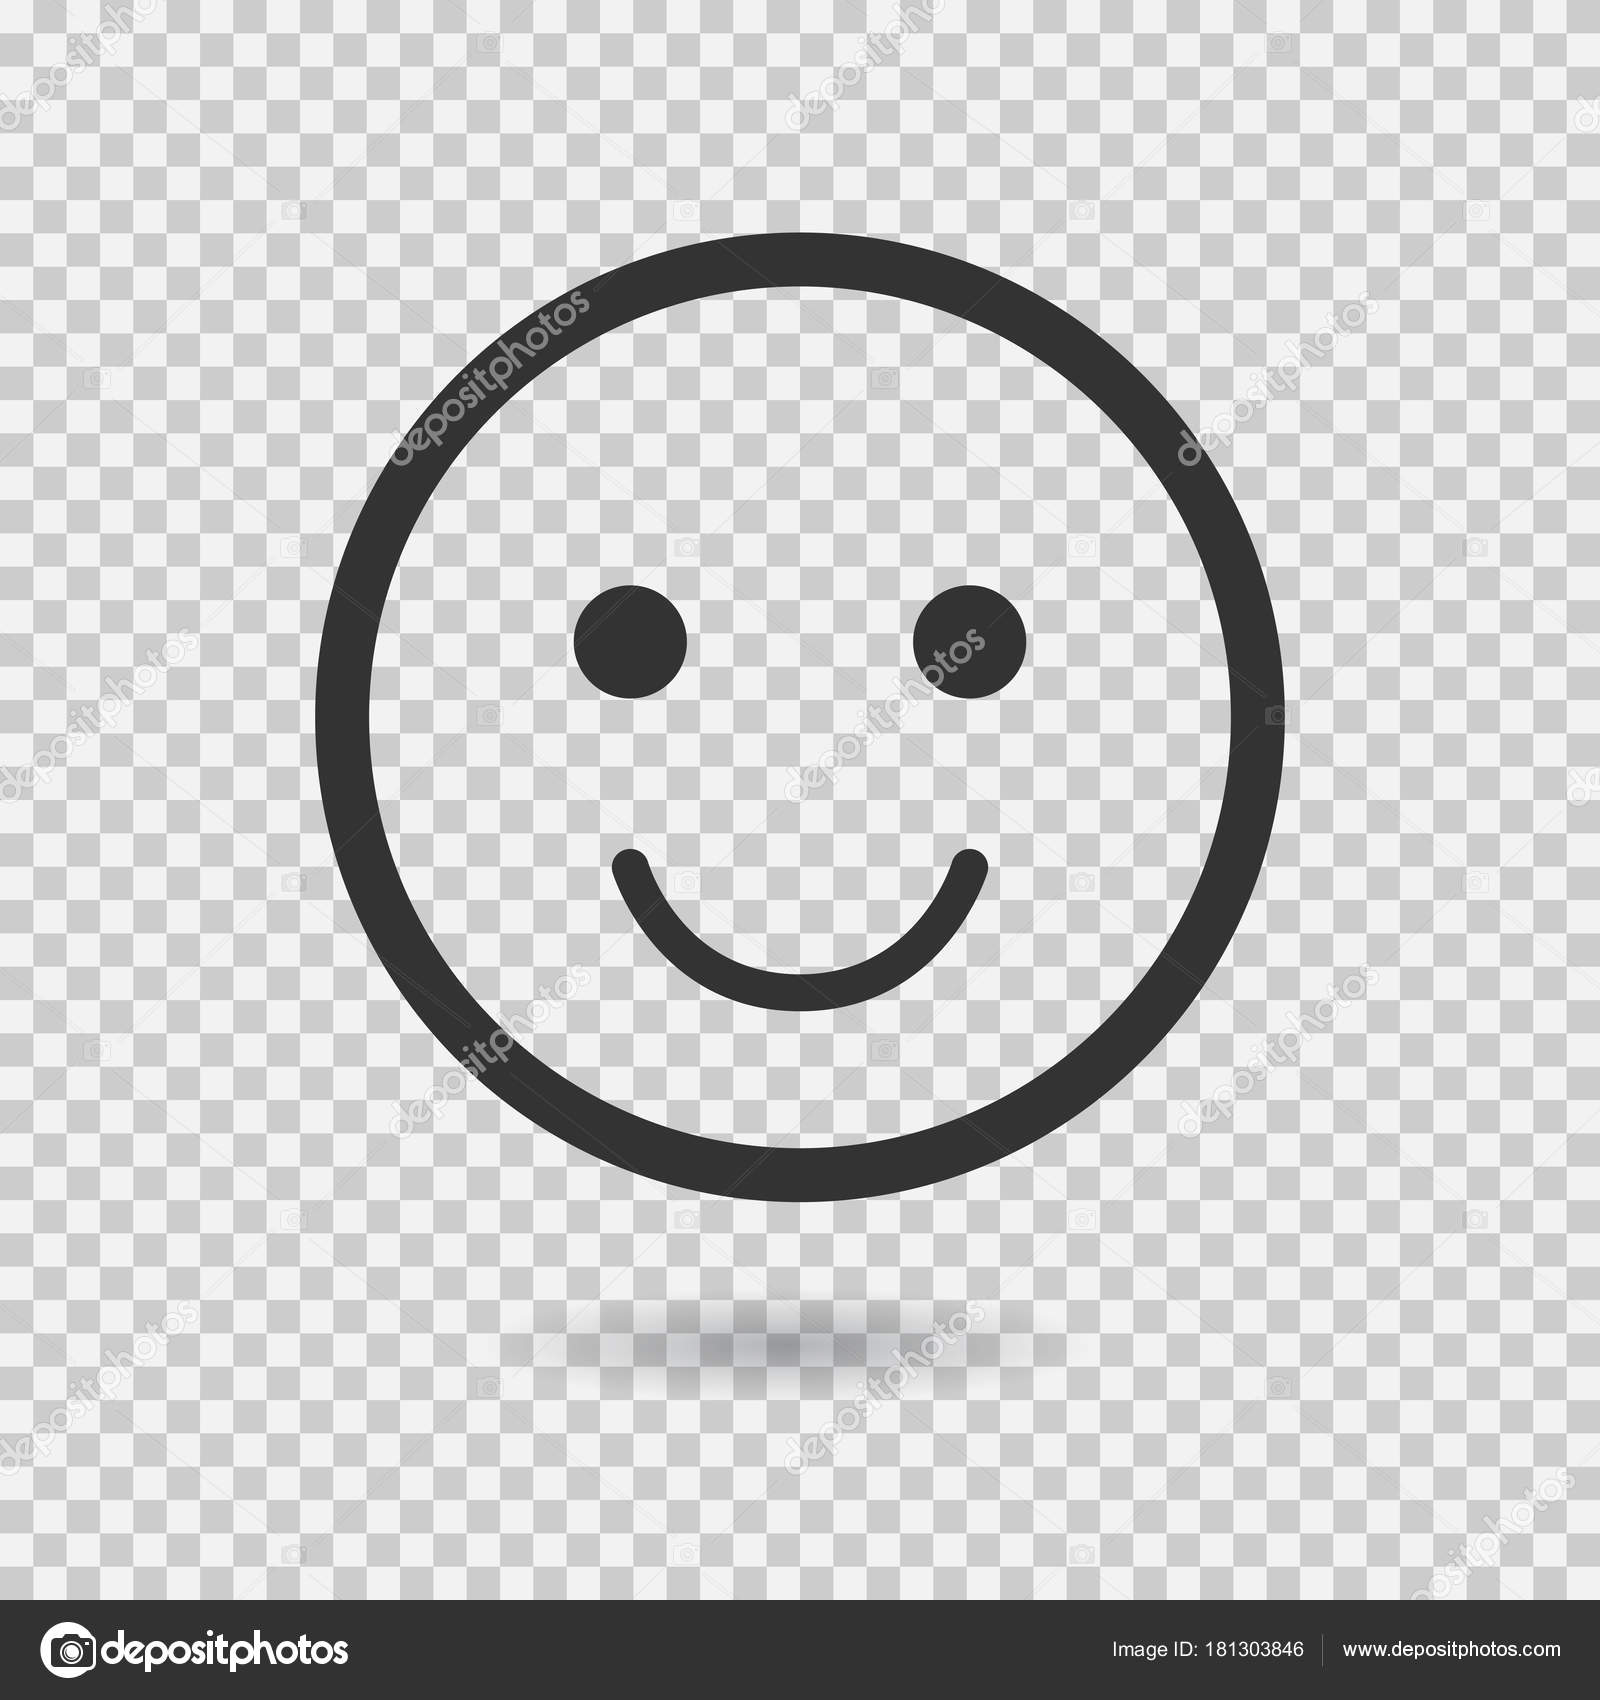 Smiley Face Transparent Background Image In Collection